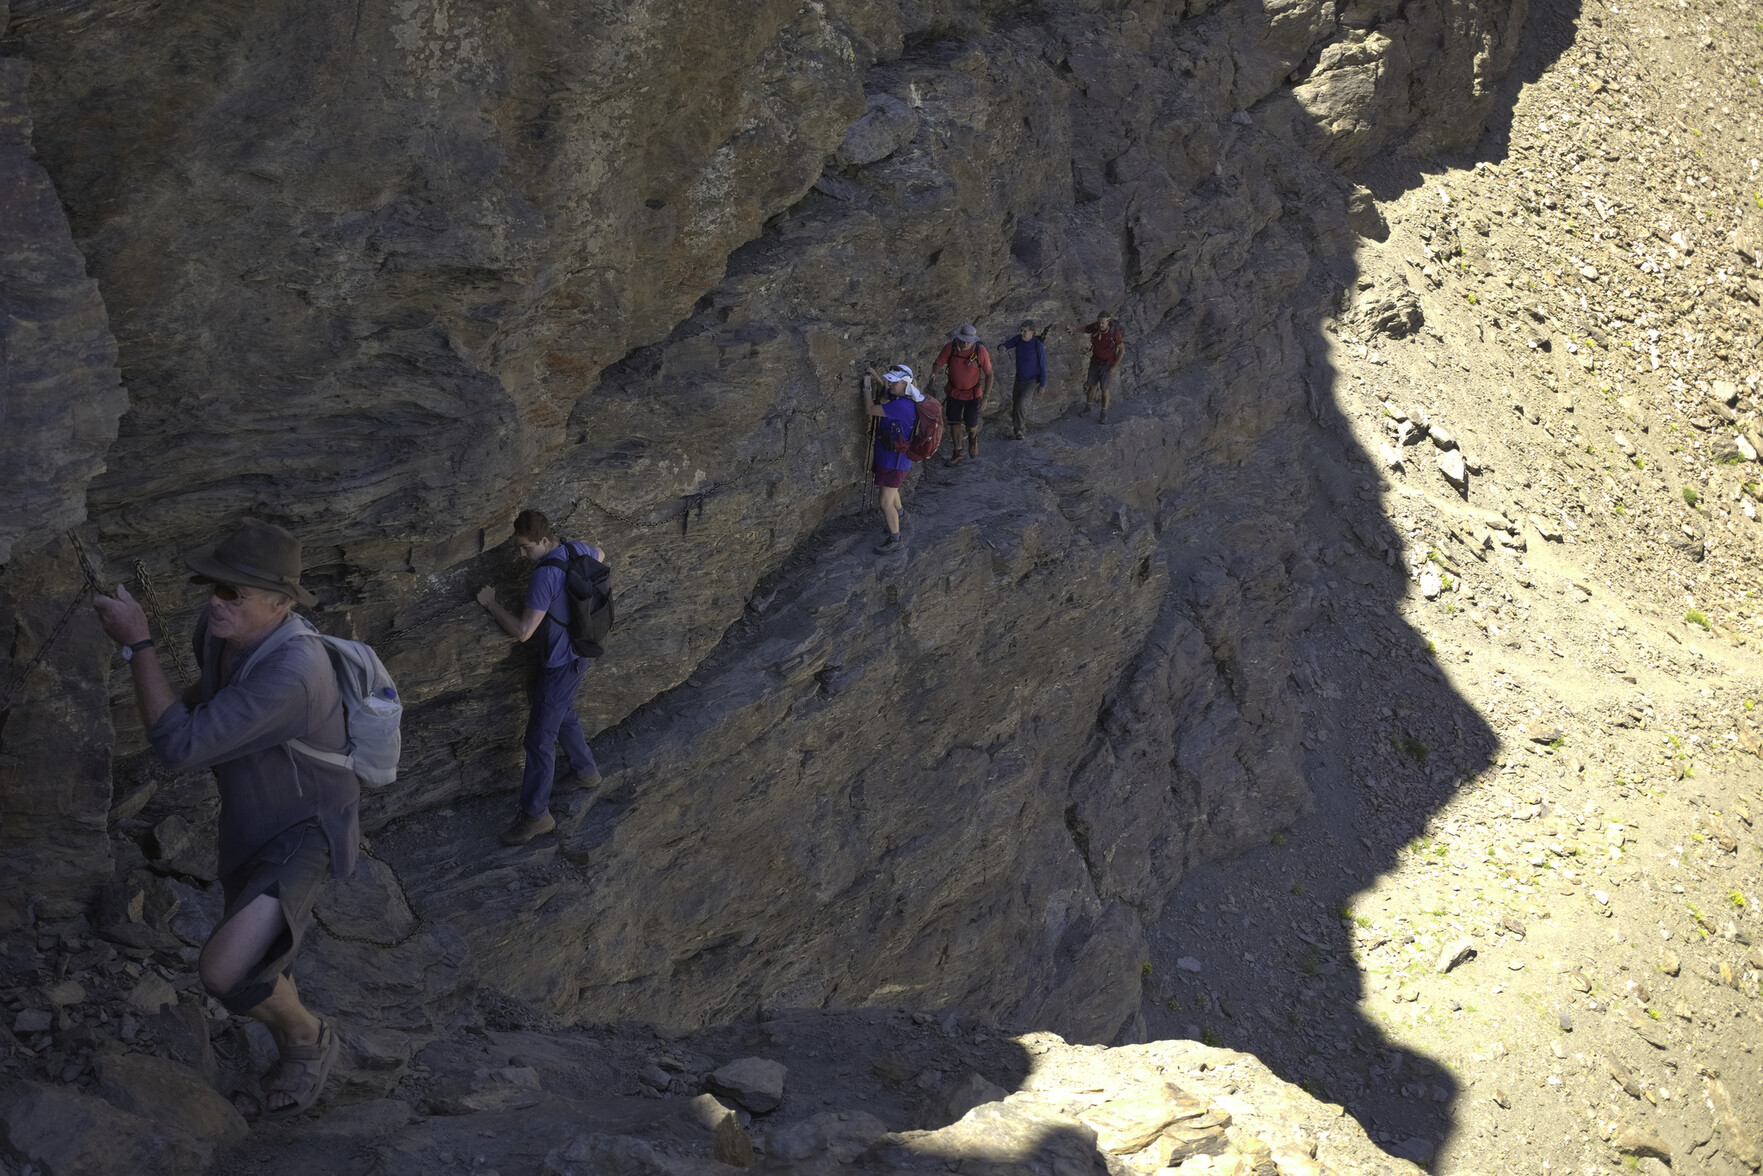 The "Paso de los Guias" ... a group of hikers crossing a steep rock wall holding onto a fixed chain for safety